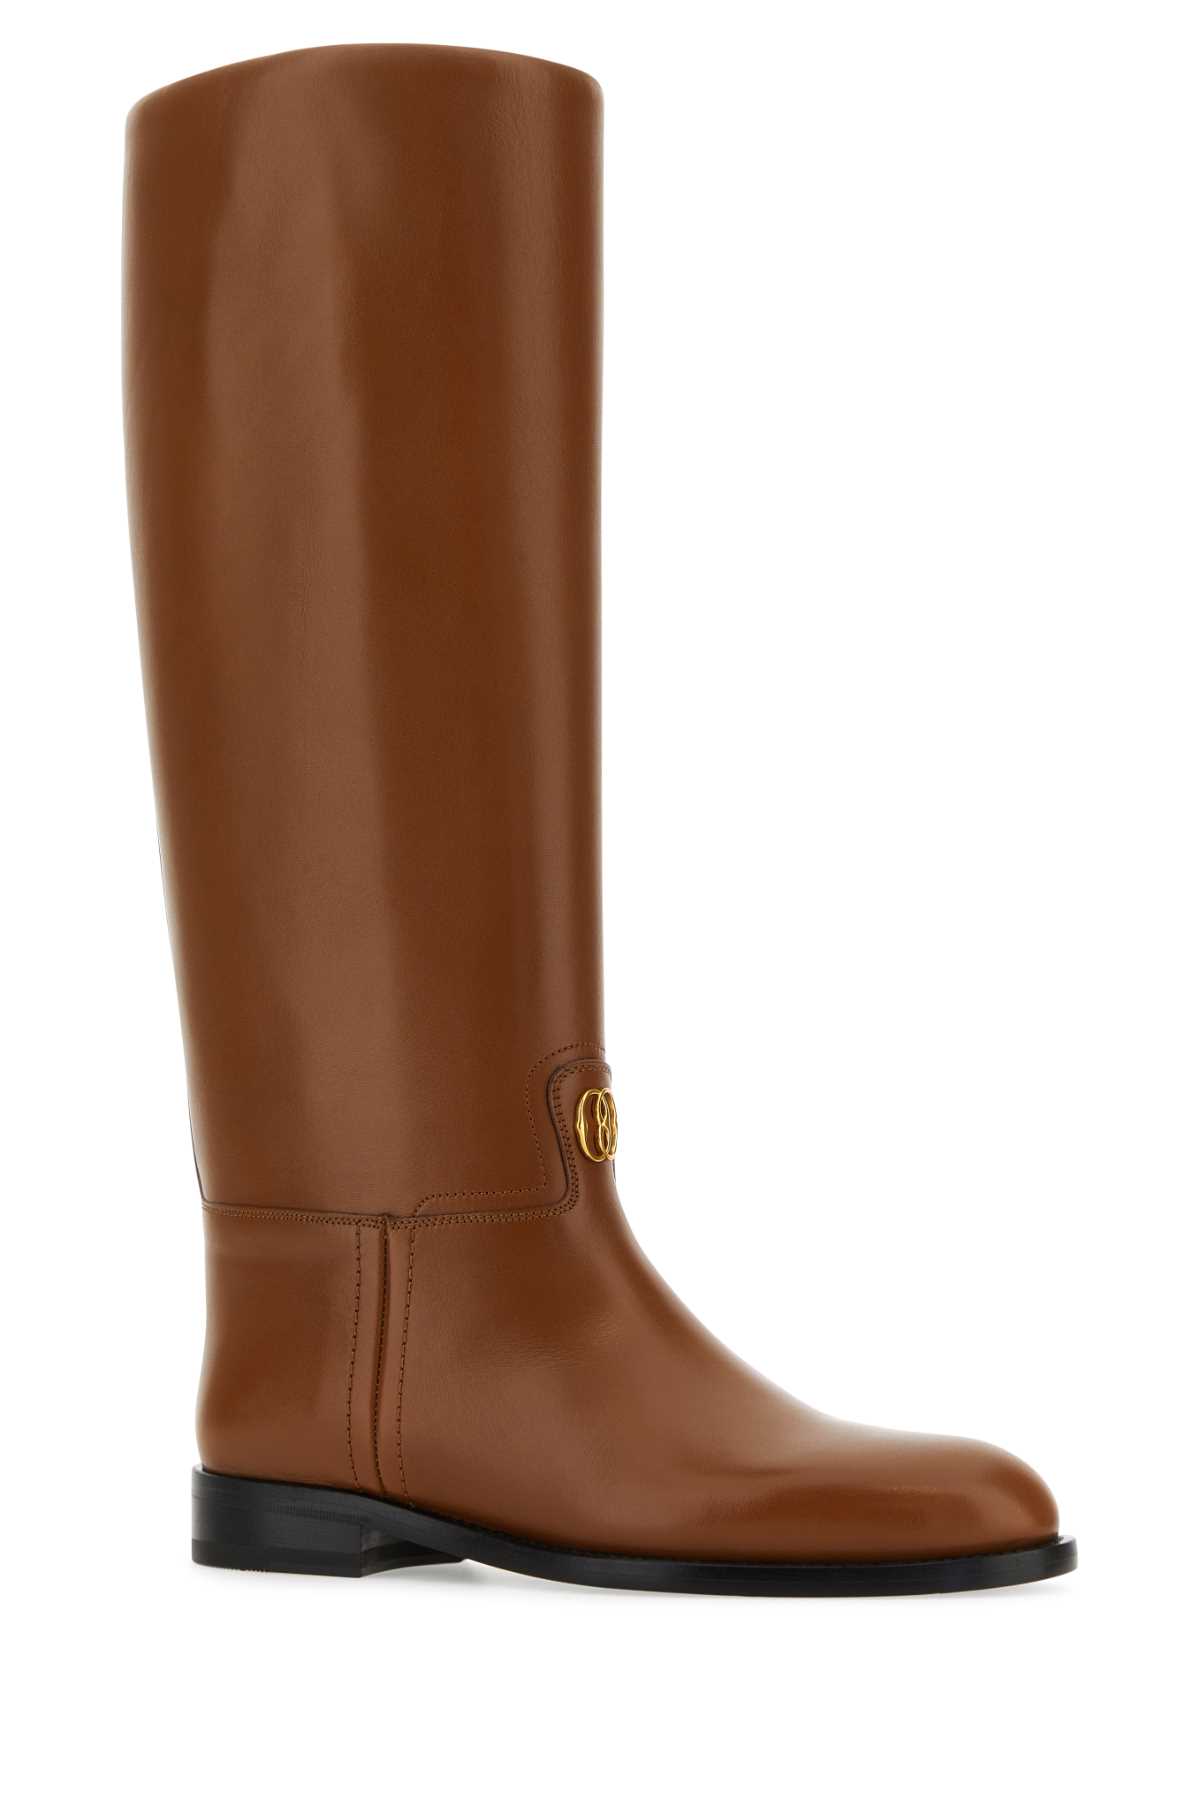 Bally Brown Leather Hollie Boots In Cuero21